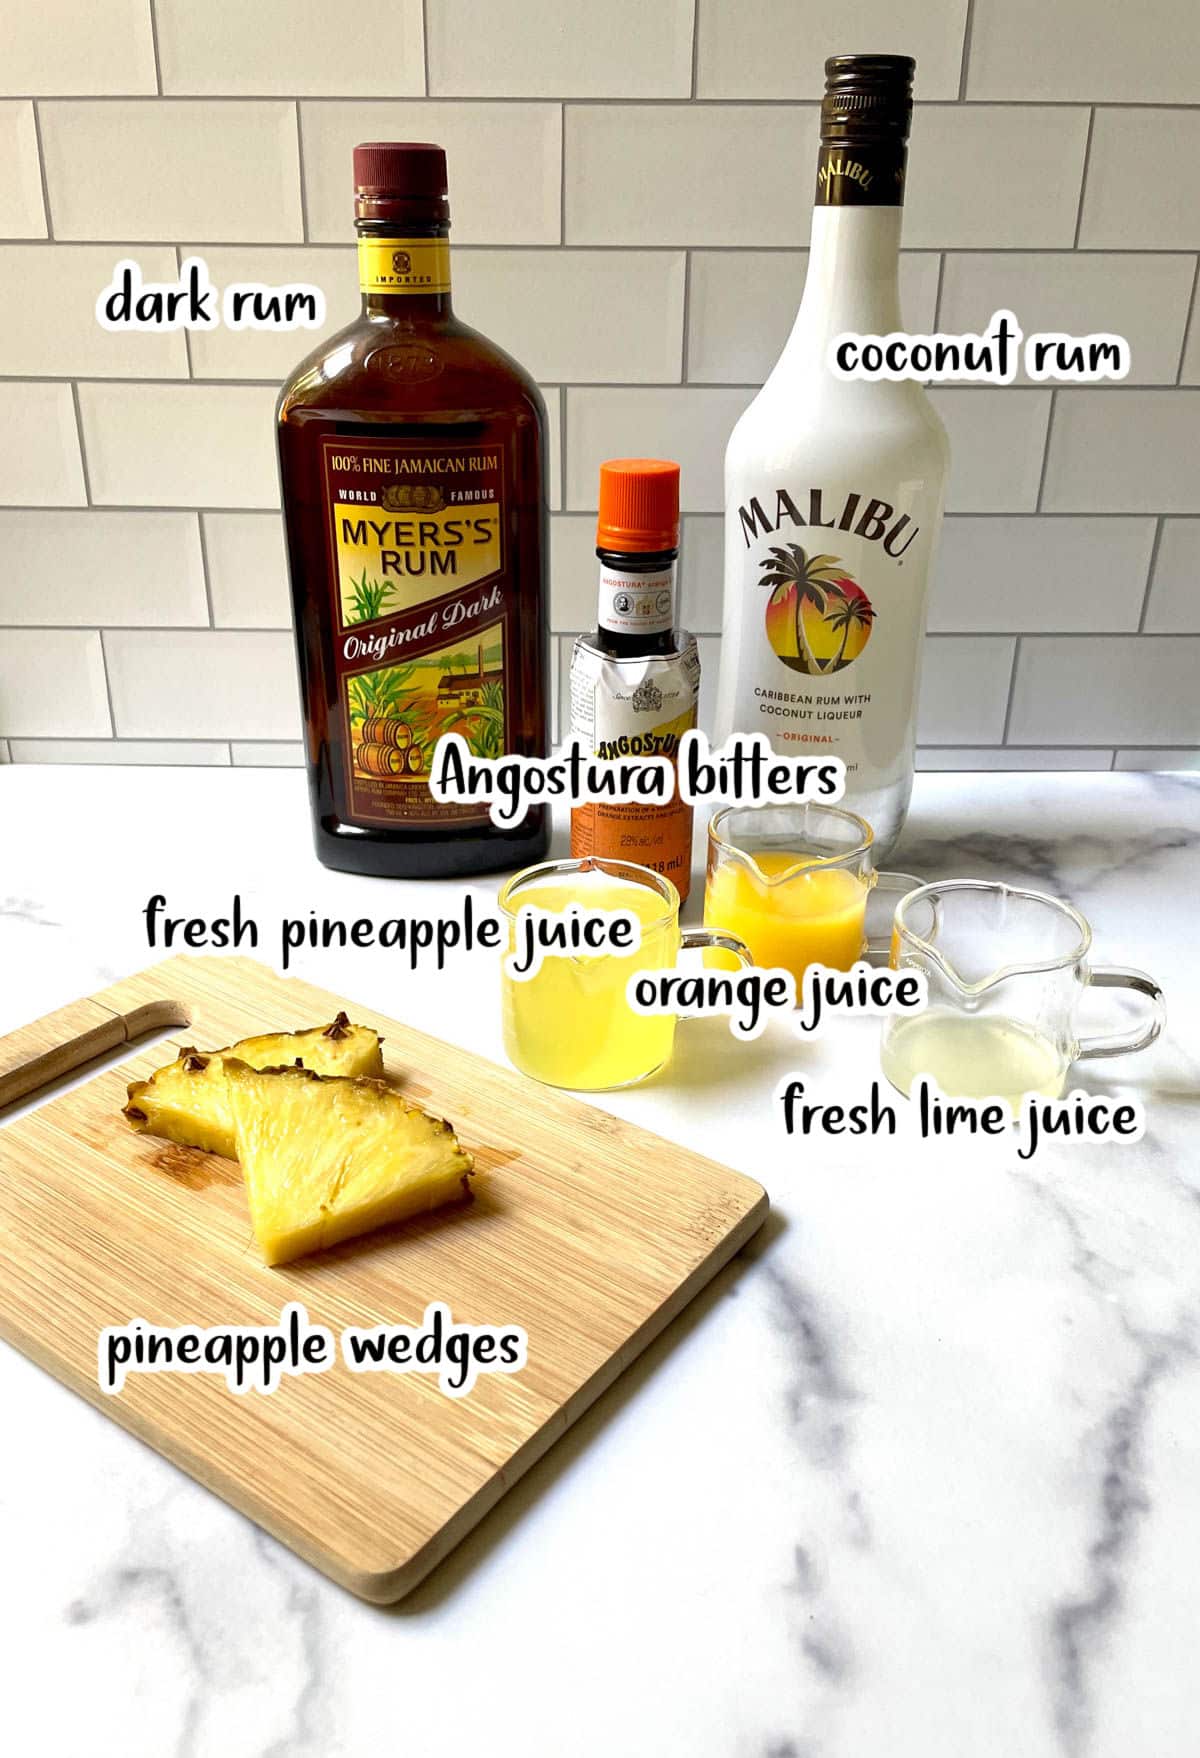 Ingredients for a coconut rum cocktail.